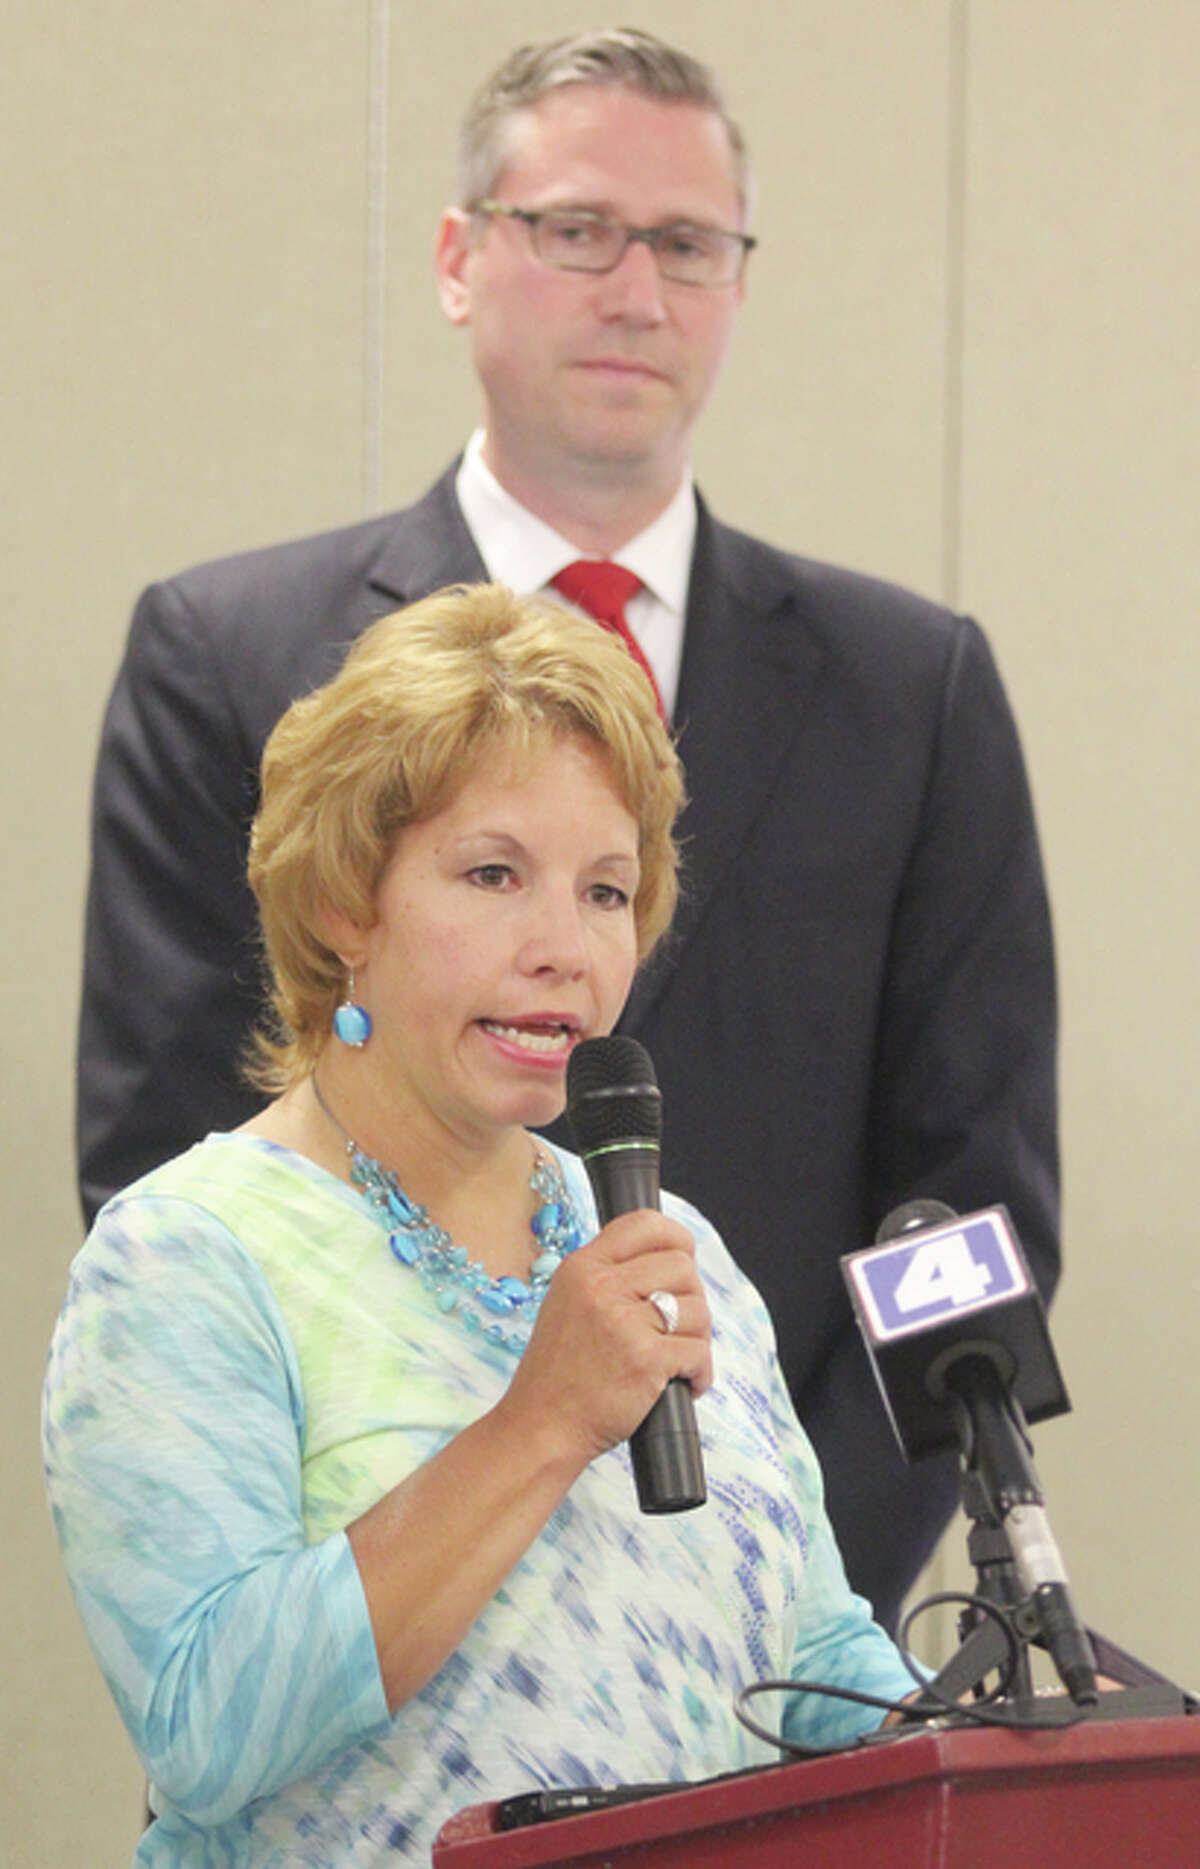 Sherry Mayberry, of Wood River, speaks at a press conference Thursday morning at Senior Services Plus in Alton, as Illinois Treasurer Michael Frerichs looks on. He was in town to encourage Gov. Bruce Rauner to sign HB 4633, which requires insurers to use the federal Death Master File to determine if a policy holder has died and the death benefits have not been paid.